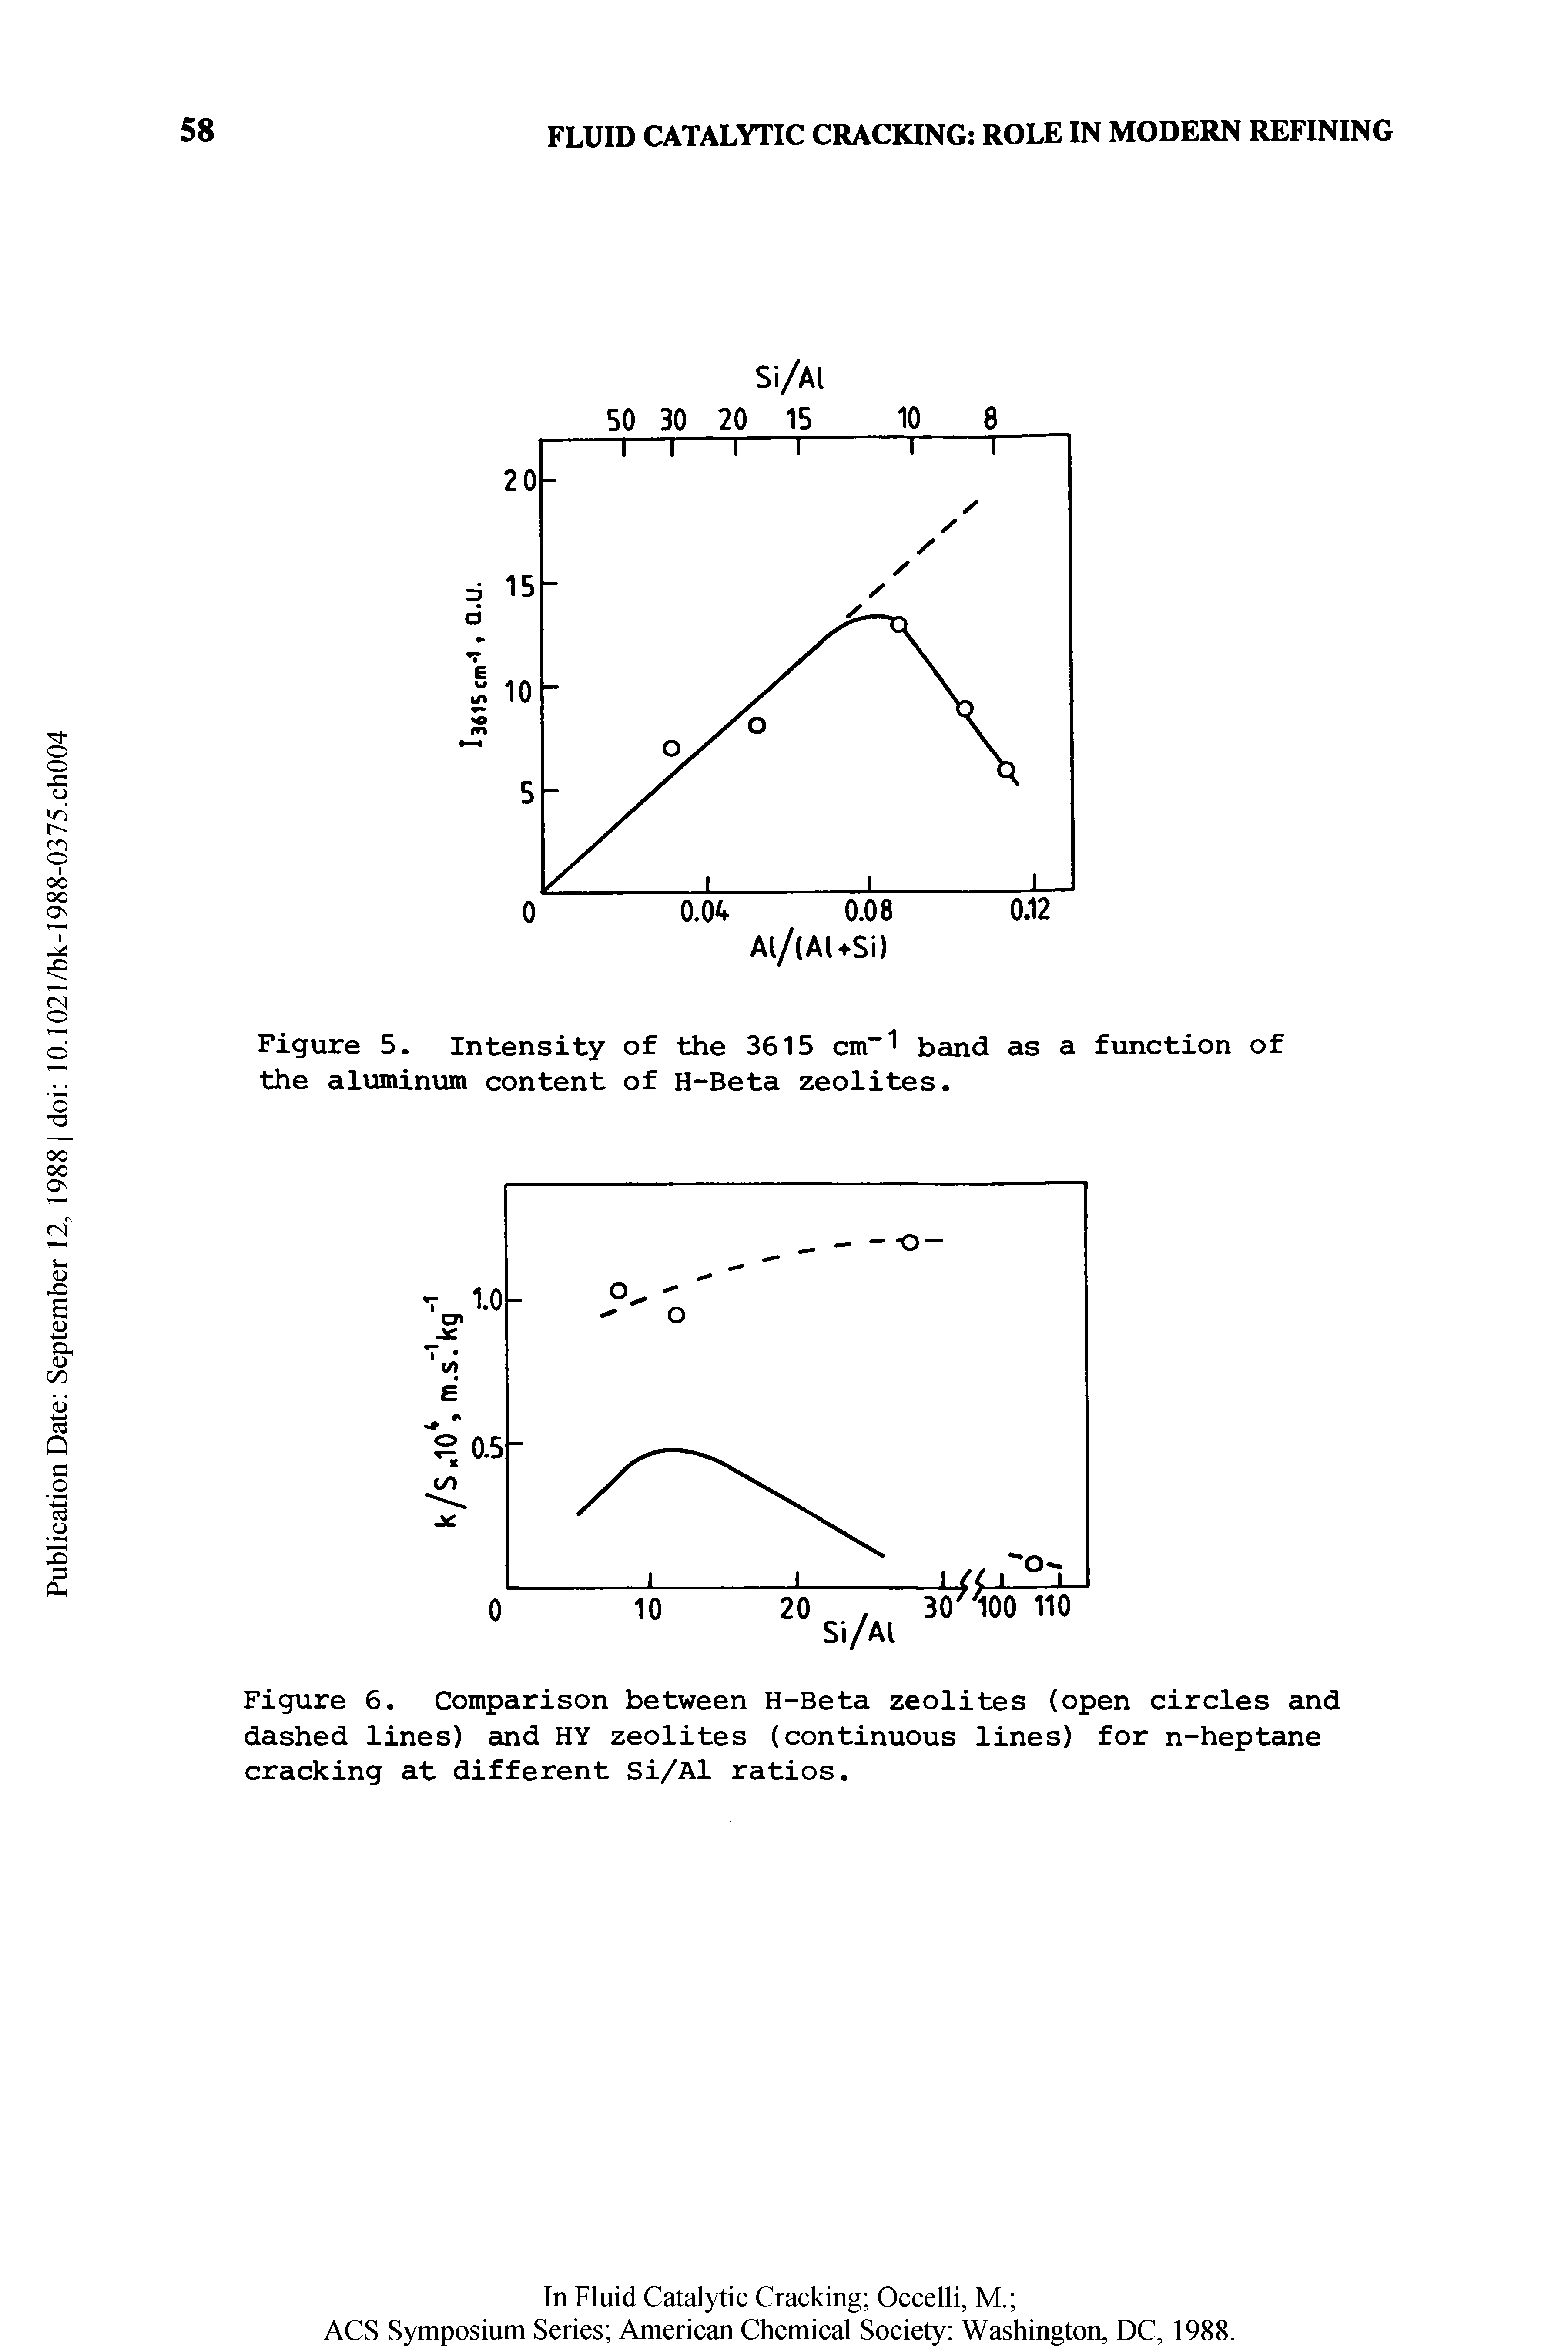 Figure 6. Comparison between H-Beta zeolites (open circles and dashed lines) and HY zeolites (continuous lines) for n-heptane cracking at different Si/Al ratios.